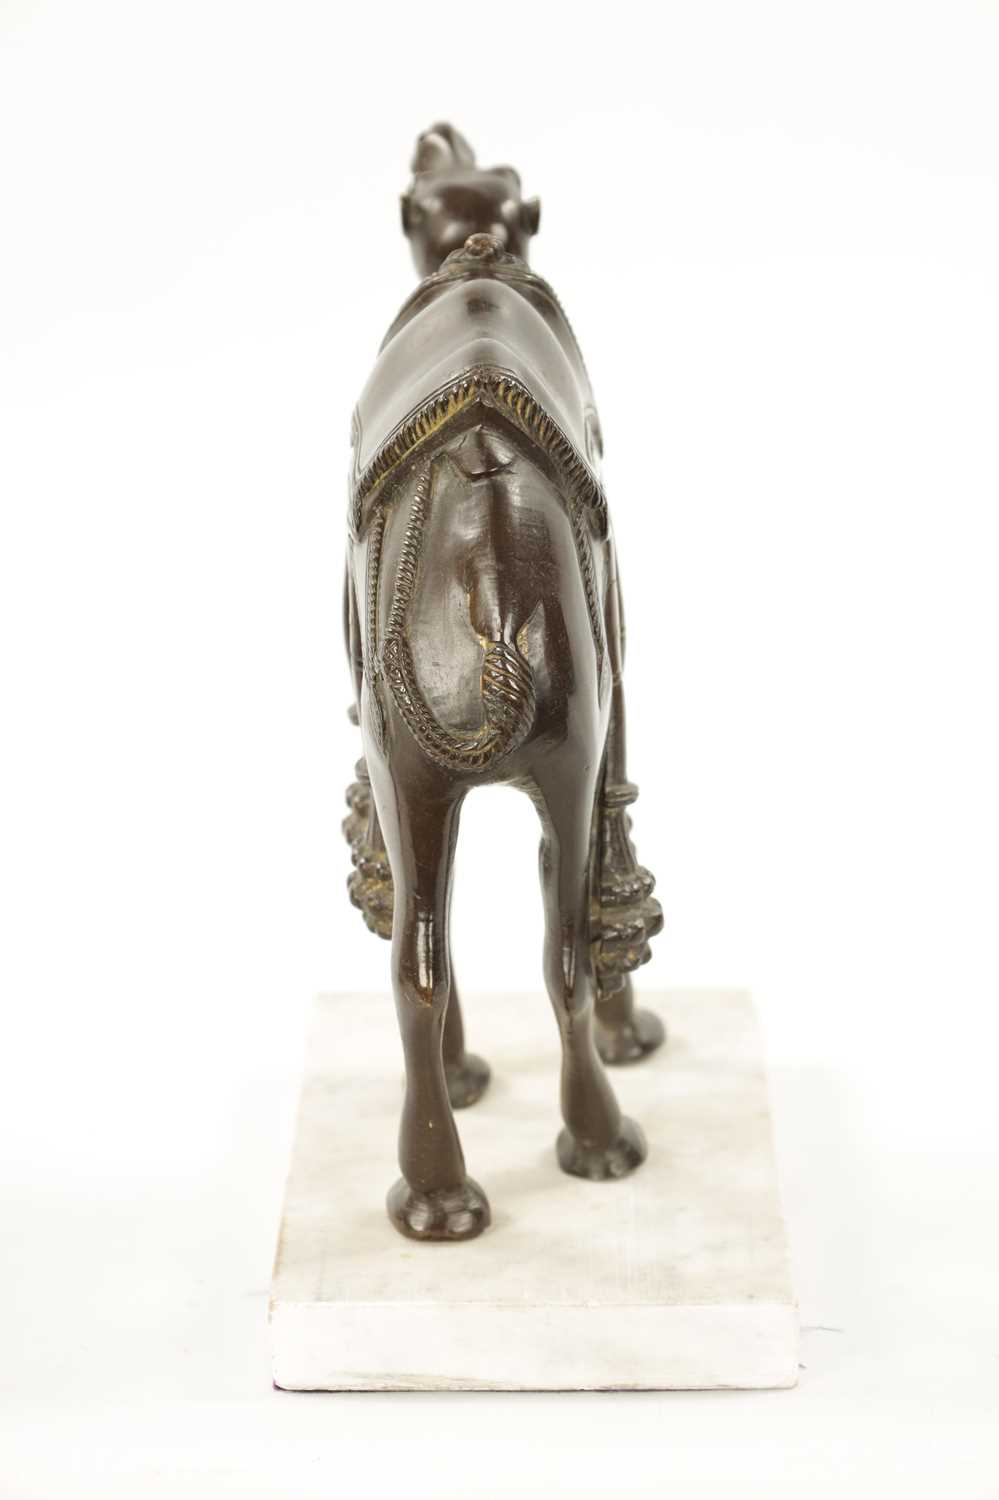 AN EARLY 20TH CENTURY BRONZE SCULPTURE OF A CAMEL - Image 5 of 8